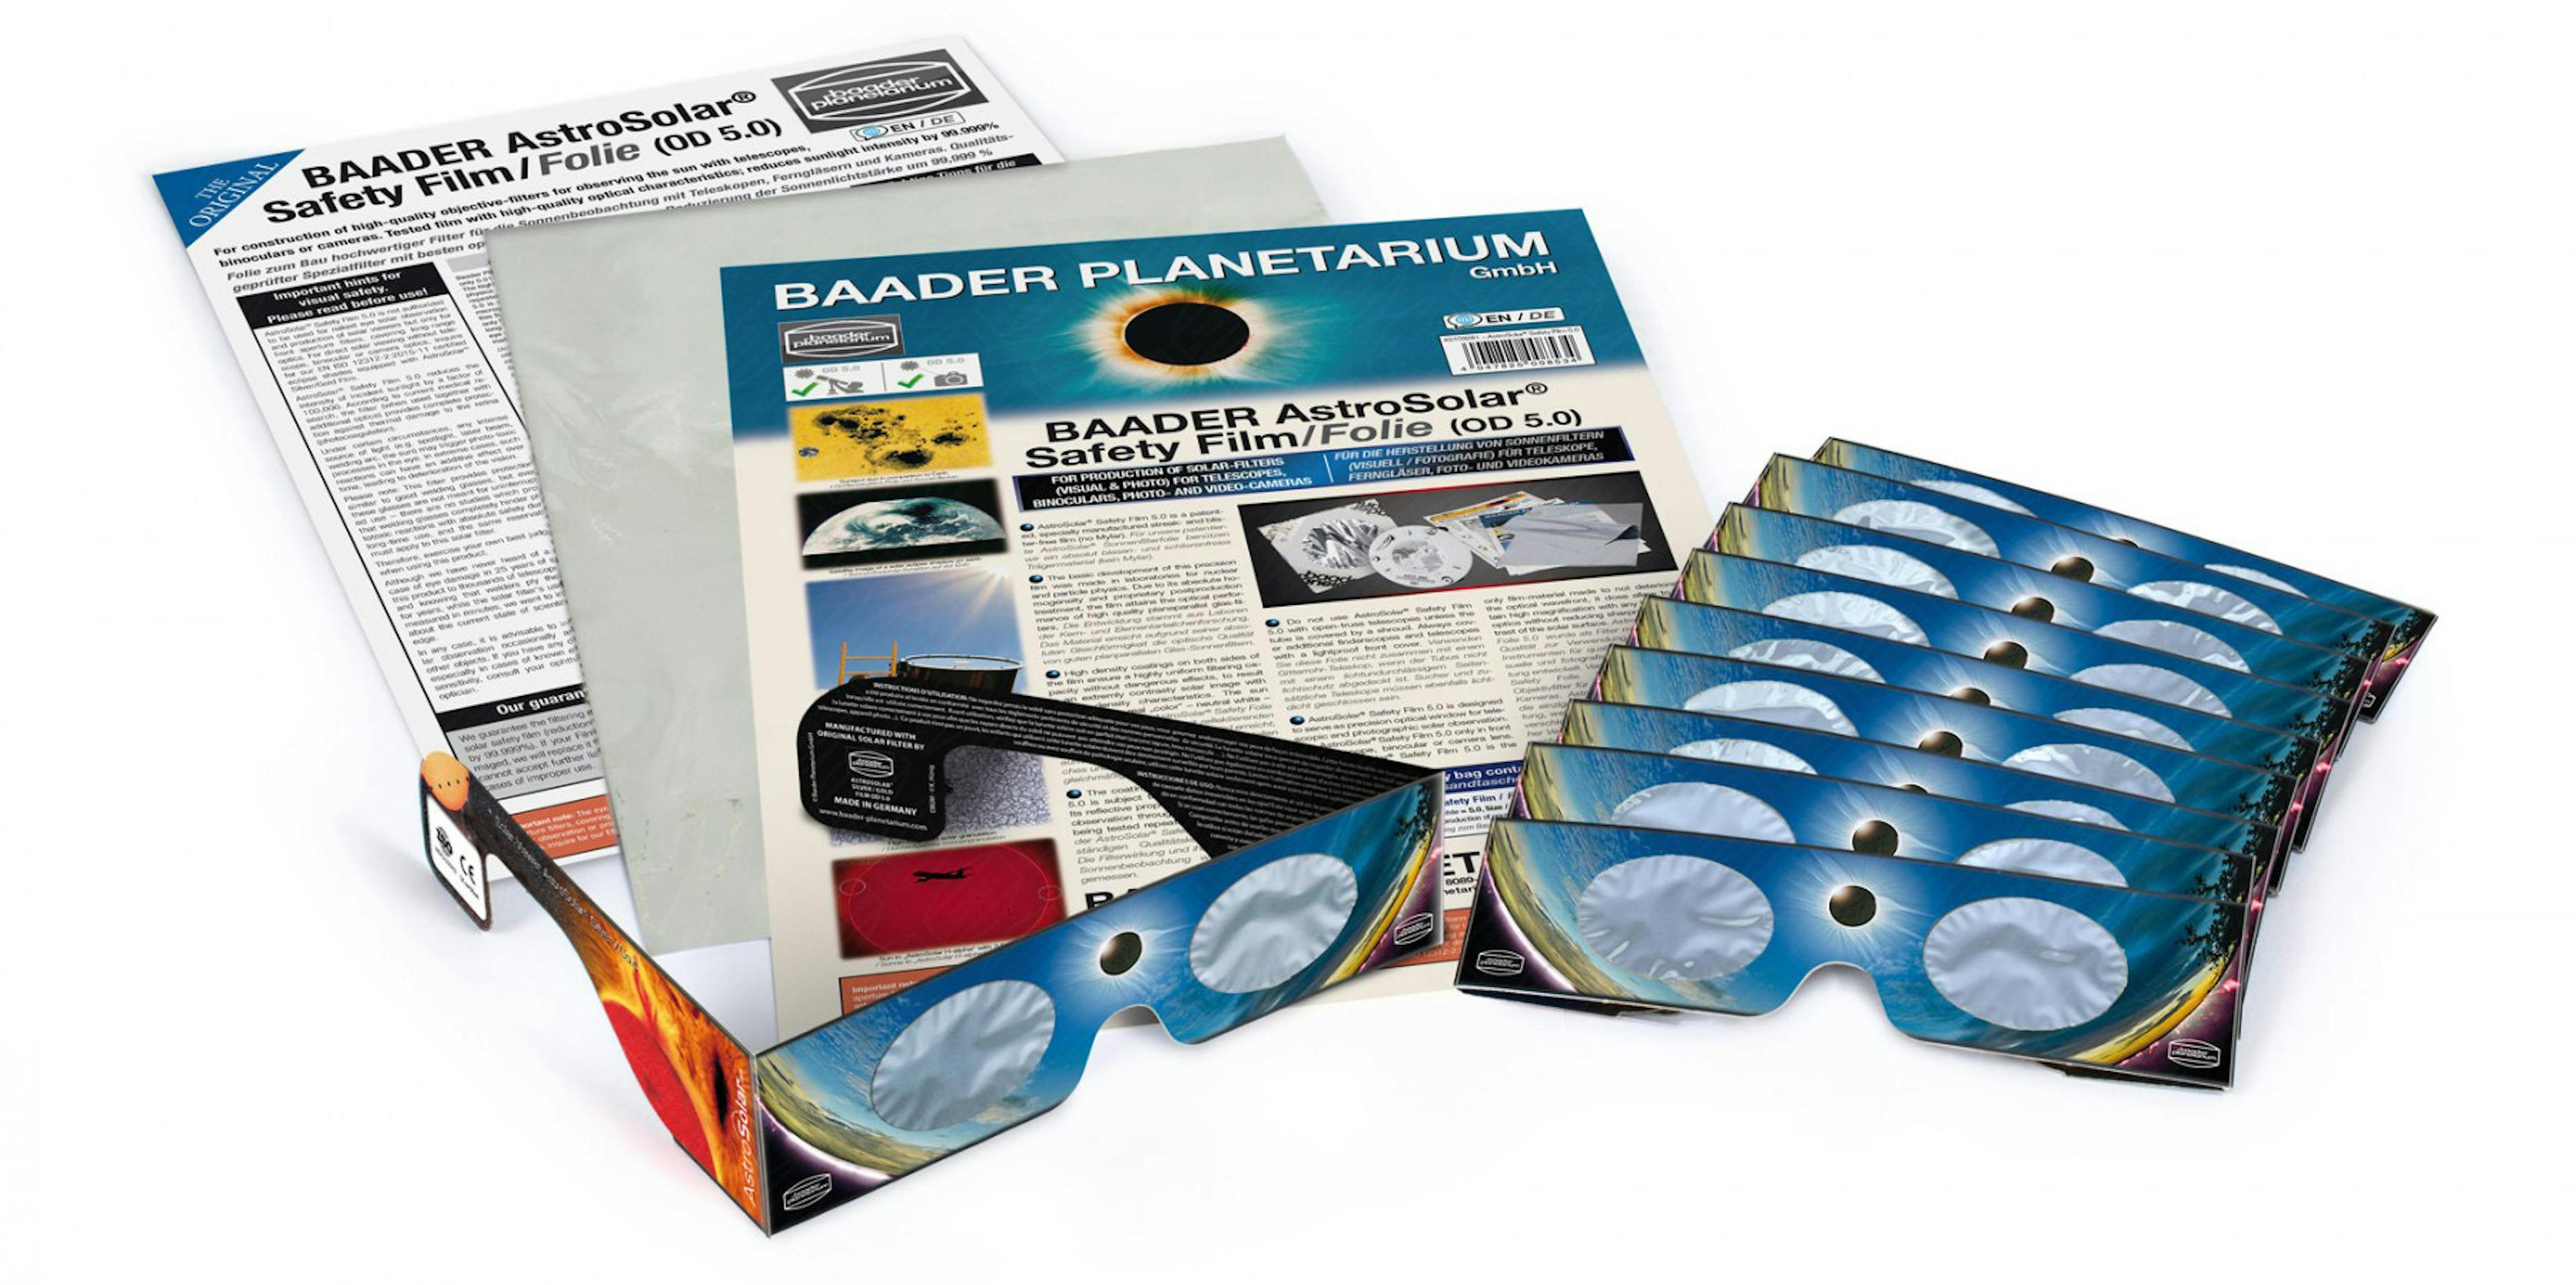 Baader Planetarium Astro Solar safety solar filters and eclipse goggles